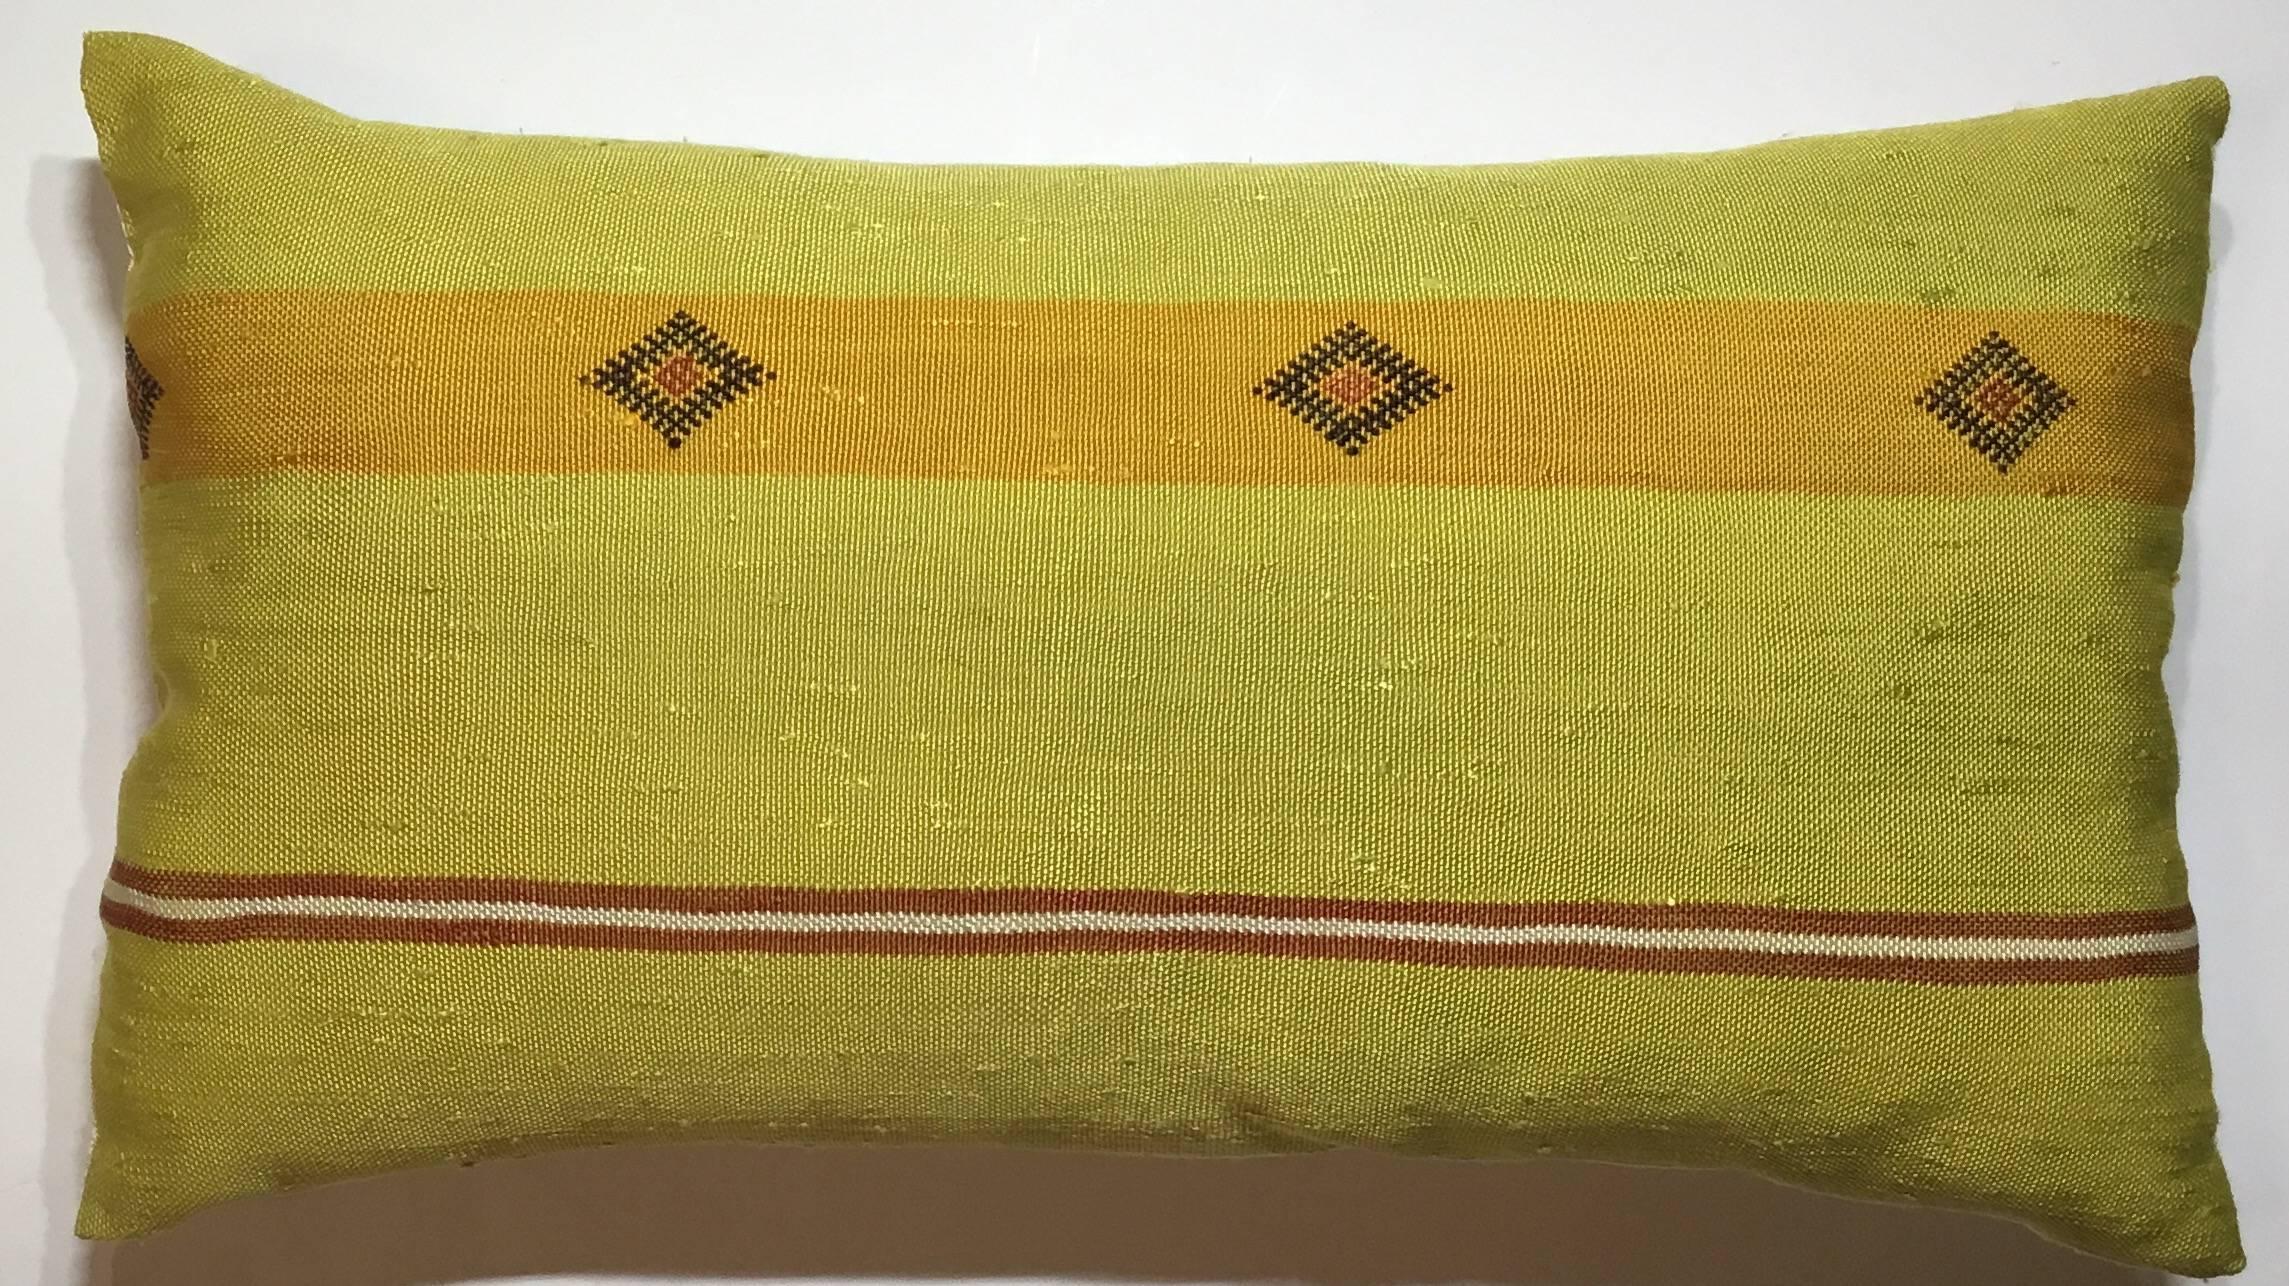 Beautiful pillow made of handwoven cactus silk textile with geometric motifs.
On exceptional beautiful lime color background.
Silk backing, frash insert.